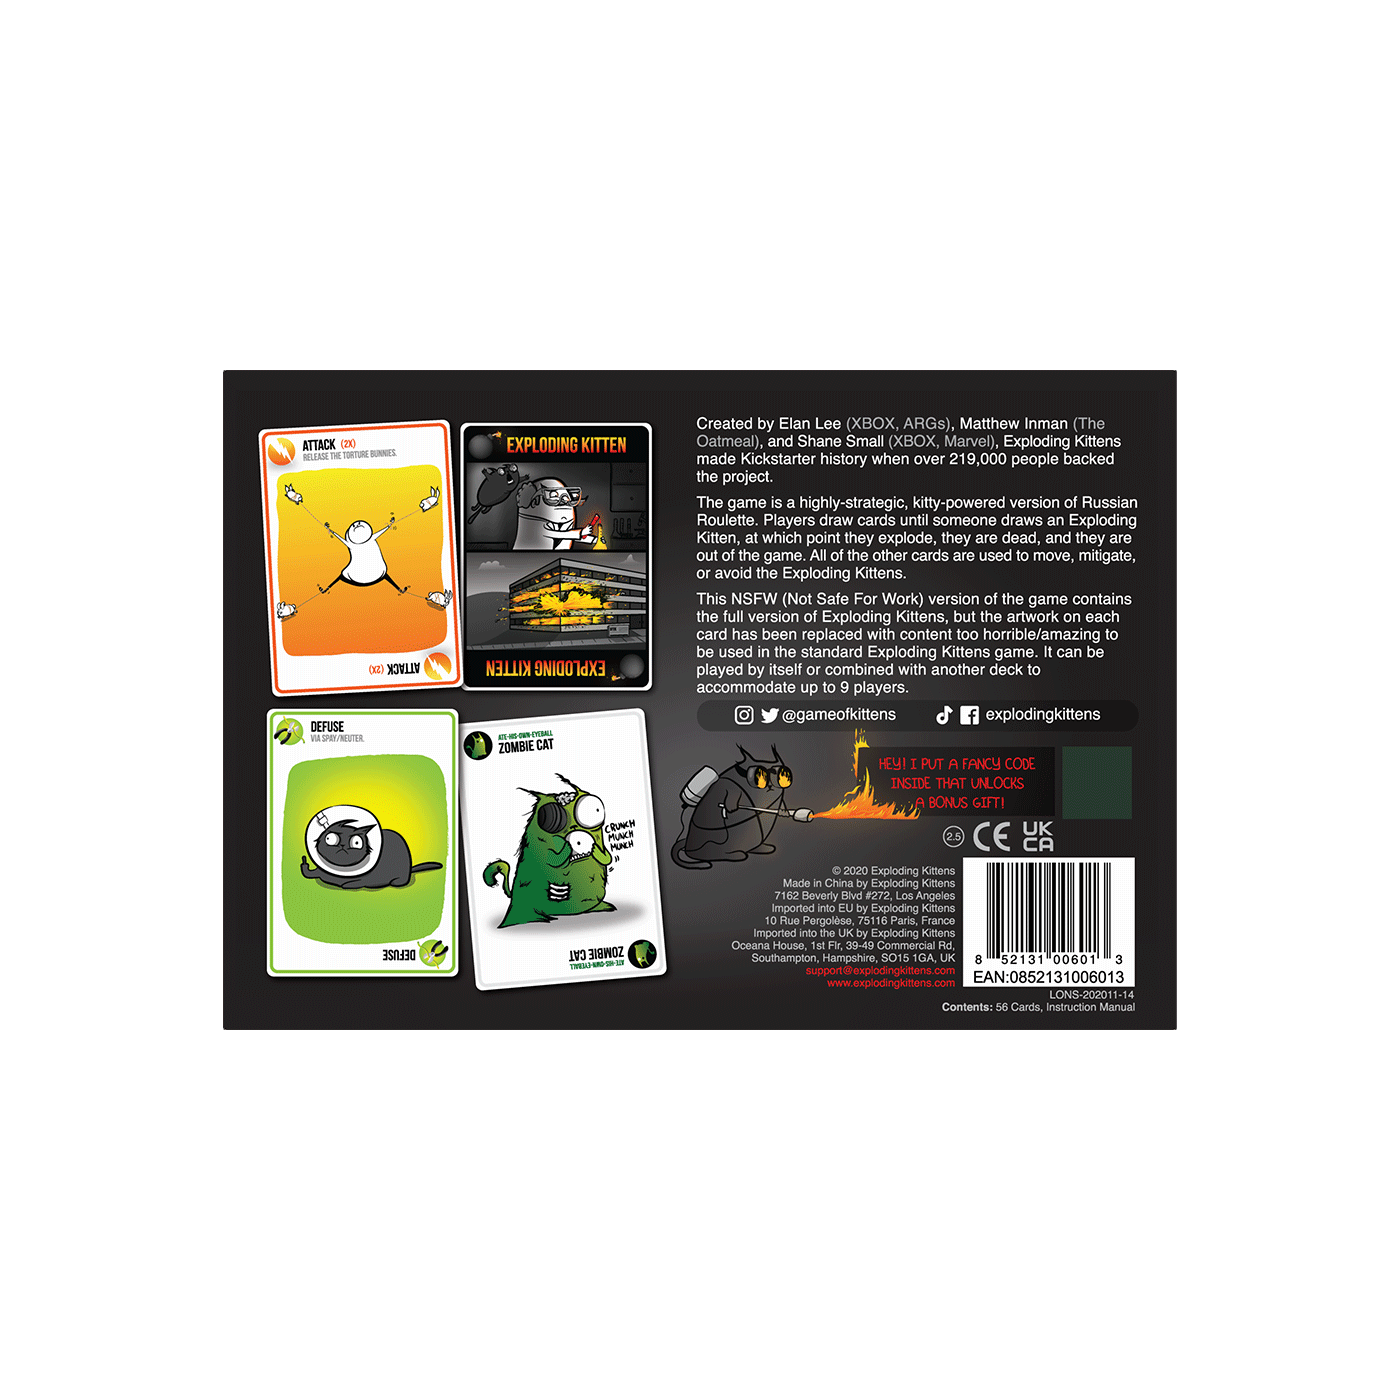 Exploding Kittens NSFW Edition, NSFW Card Game